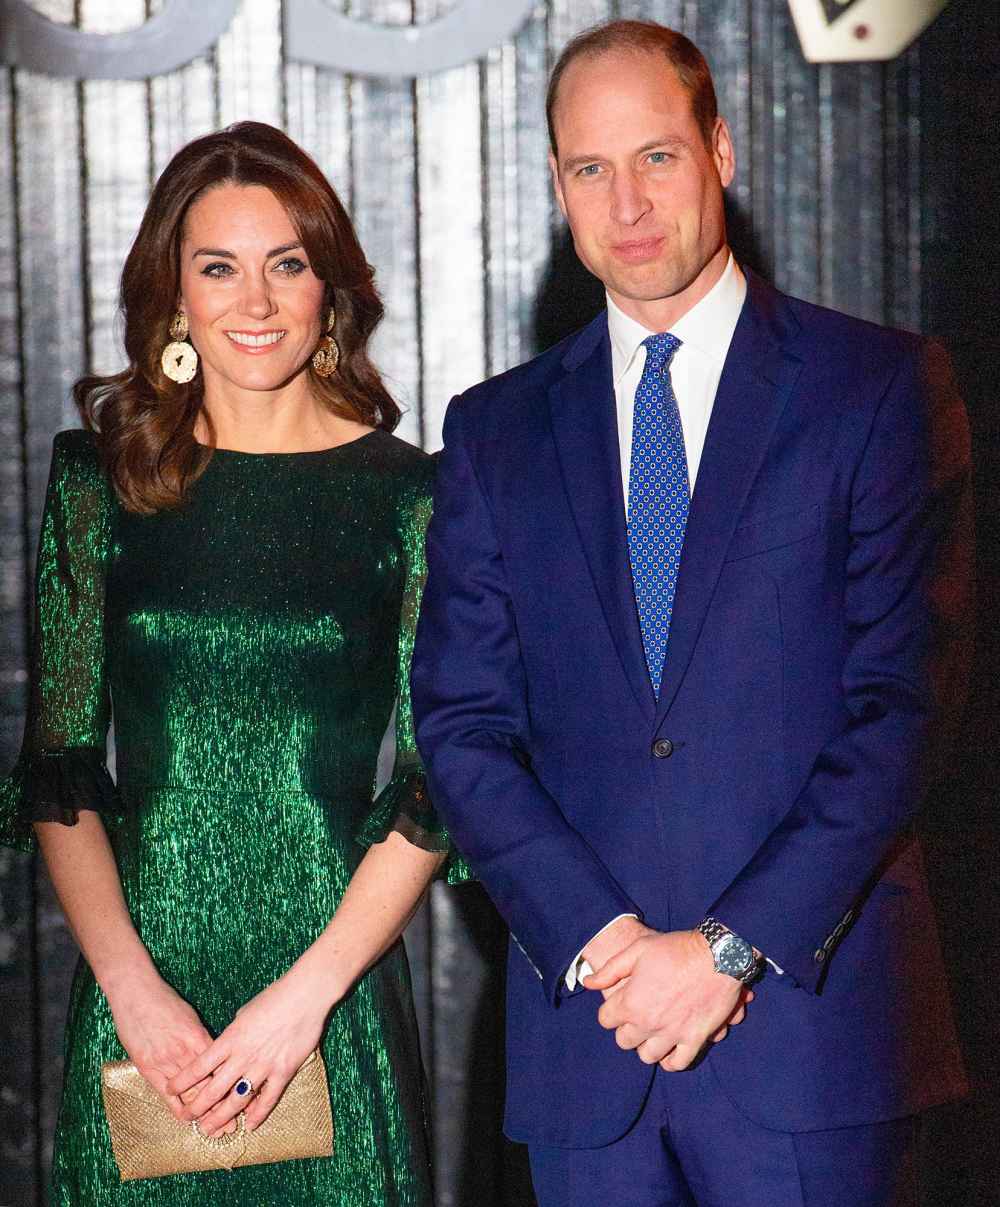 Duchess Kate Went ‘All-Out’ to Make Prince William’s 38th Birthday ‘Extra Special’